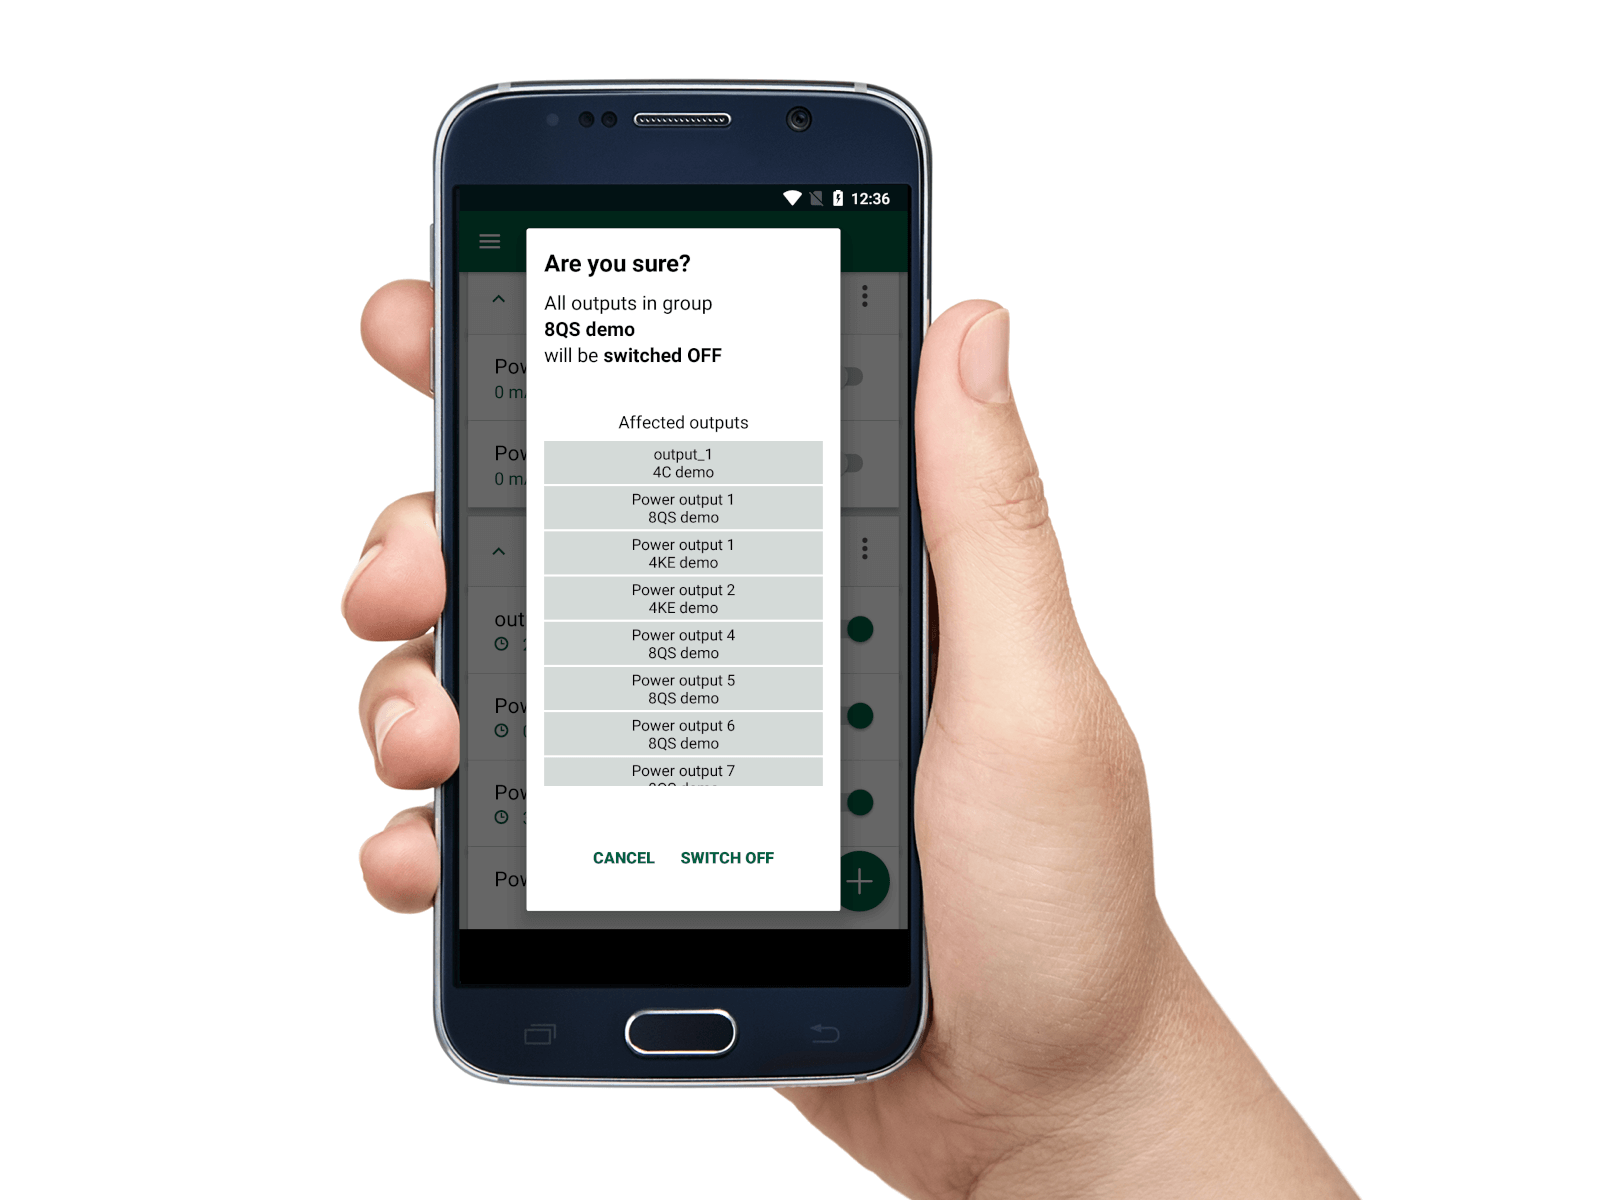 NETIO Mobile2 is a mobile application for remote control of NETIO smart power strips and PDUs